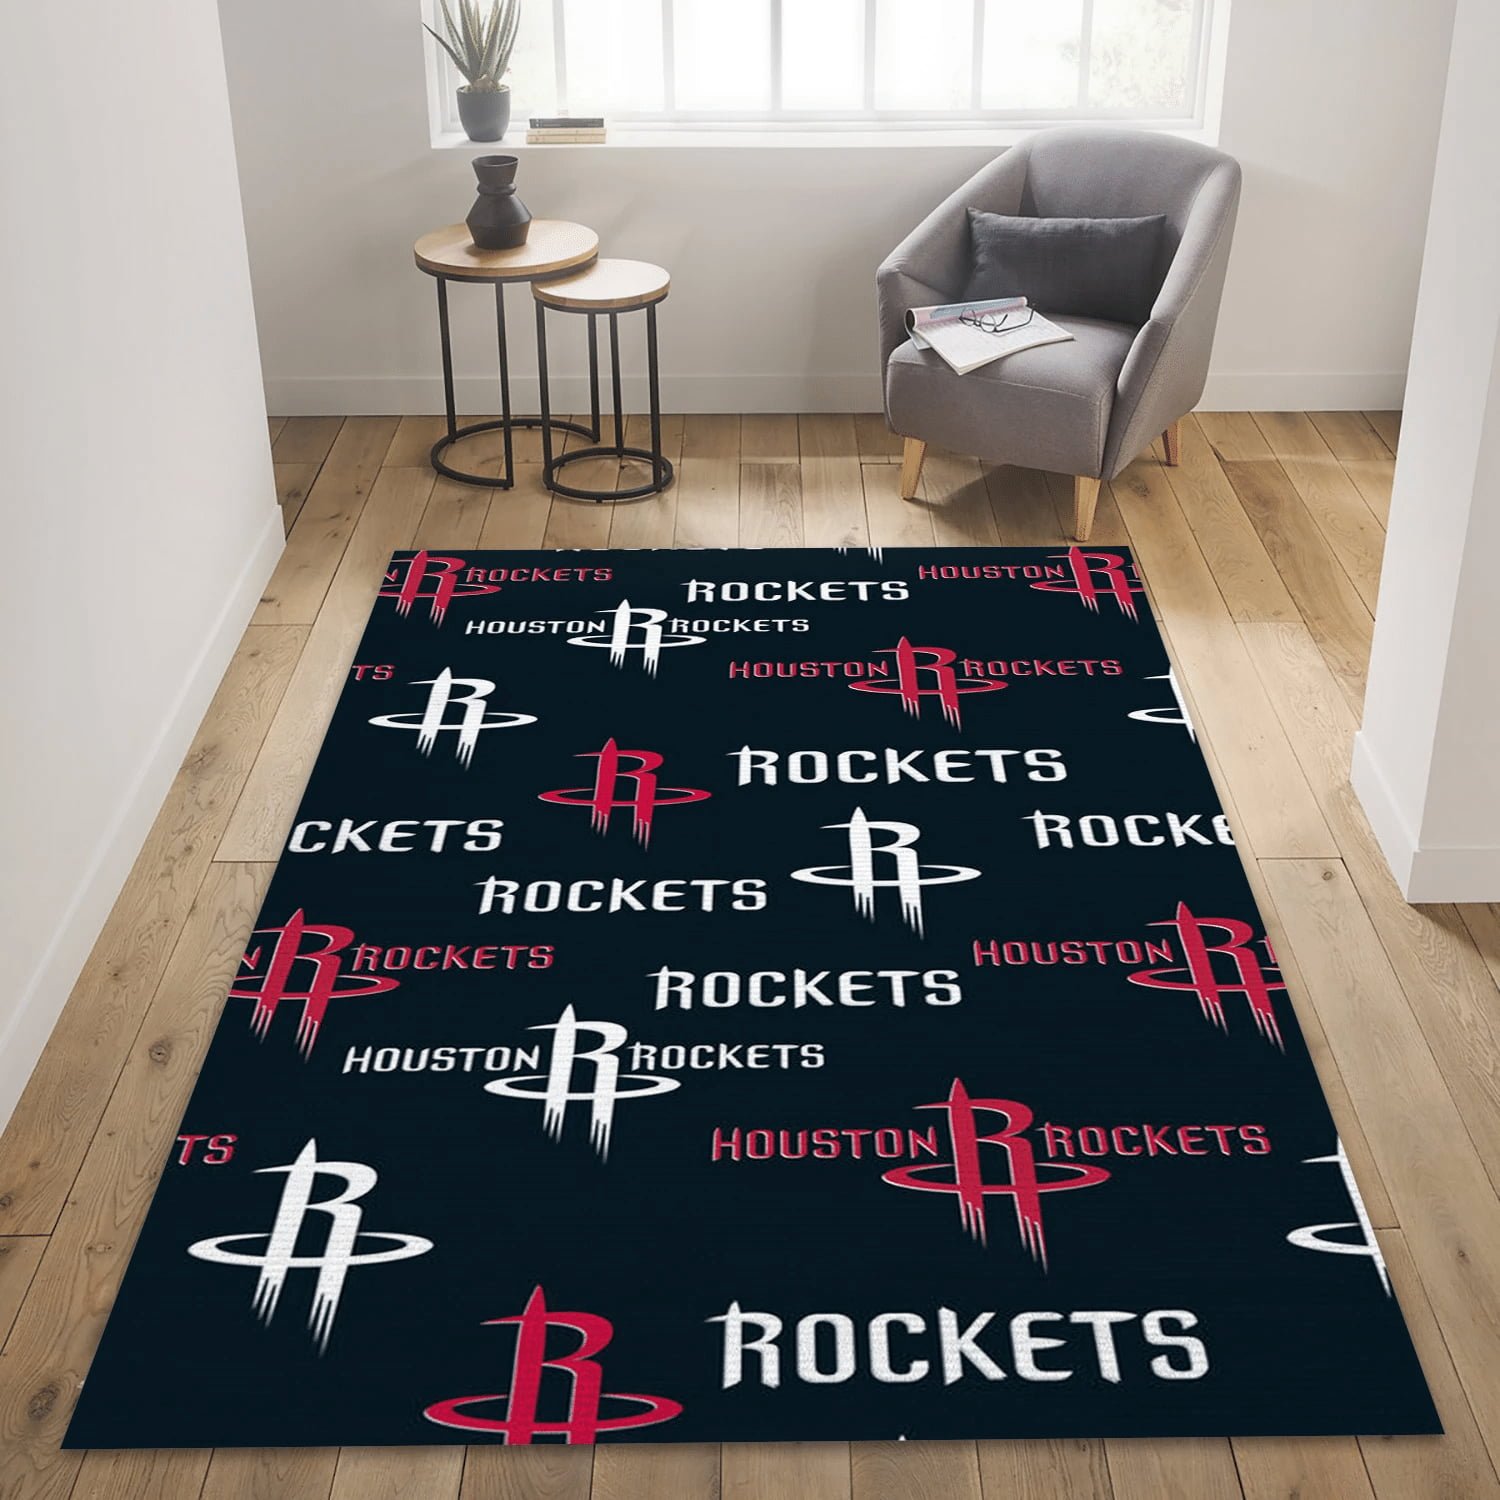 Houston Rockets Patterns 1 Reangle Area Rug, Living Room Rug - Home Decor - Indoor Outdoor Rugs